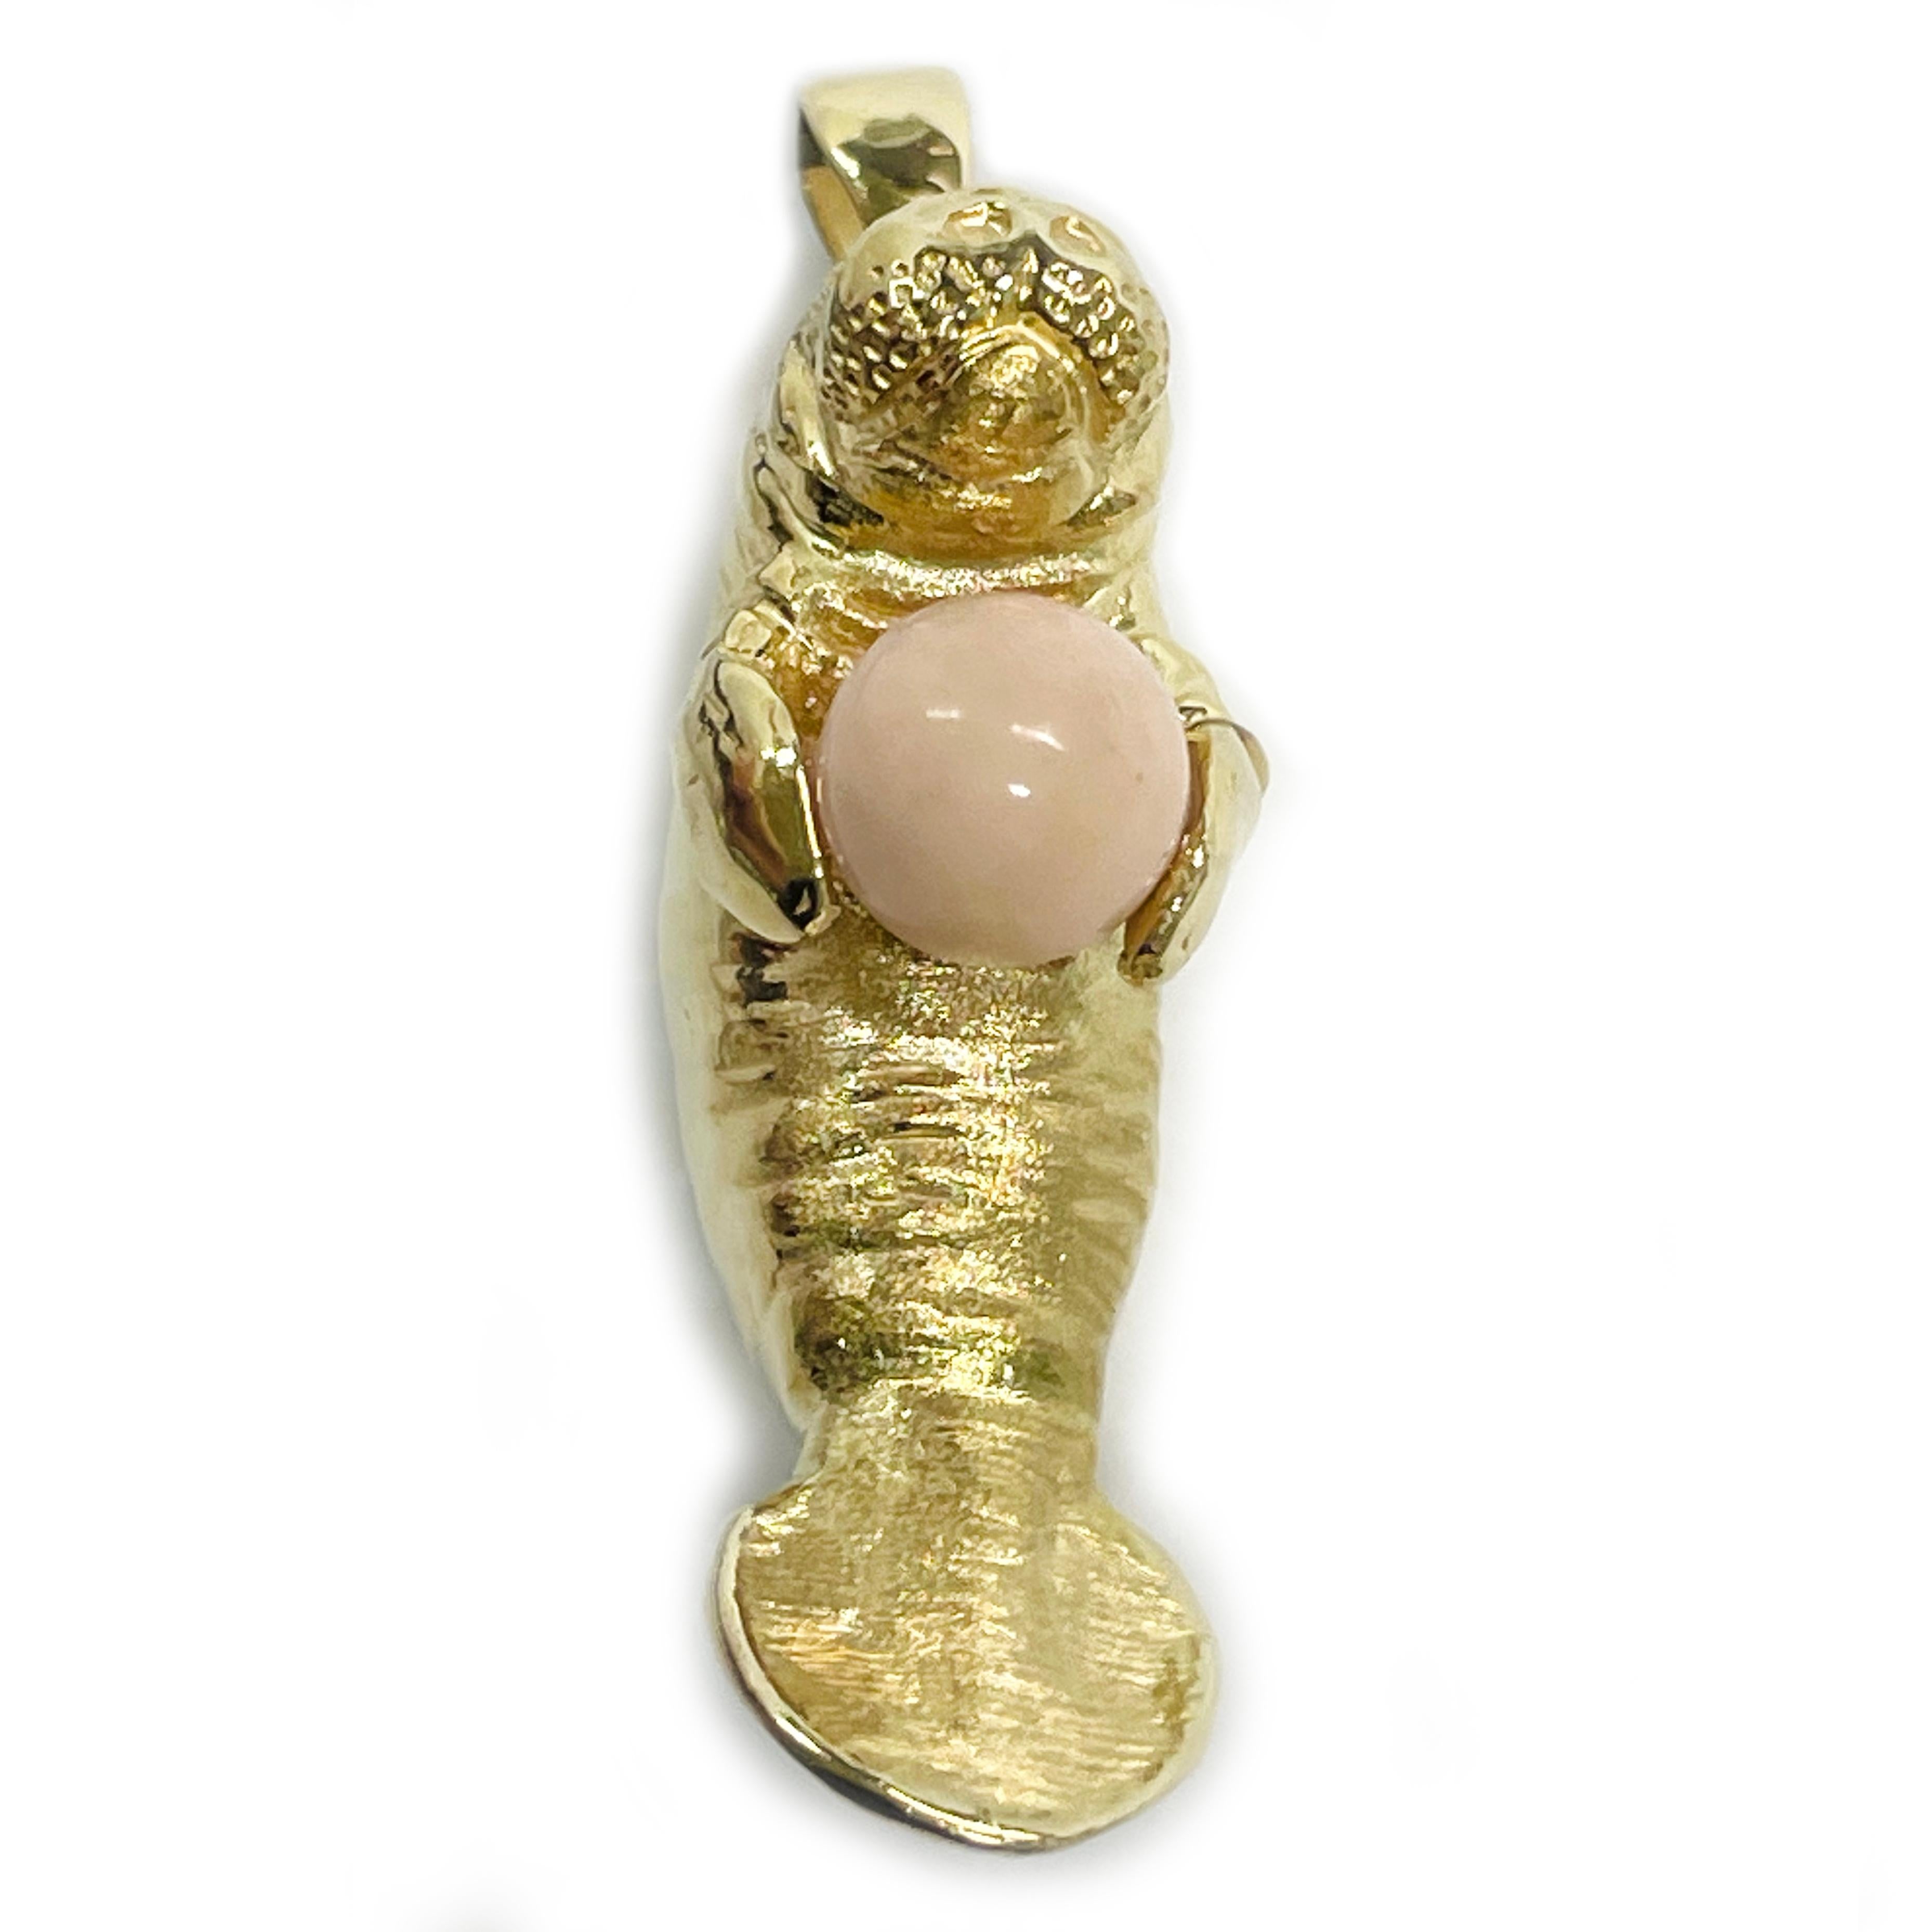 14 Karat Angel Skin Coral Manatee Pendant. This pendant features an adorable manatee holding an angel skin Coral bead. The round bead measures 9.14mm. The body of the Manatee has both a smooth and Florentine finish. The manatee measures 42.2 long x